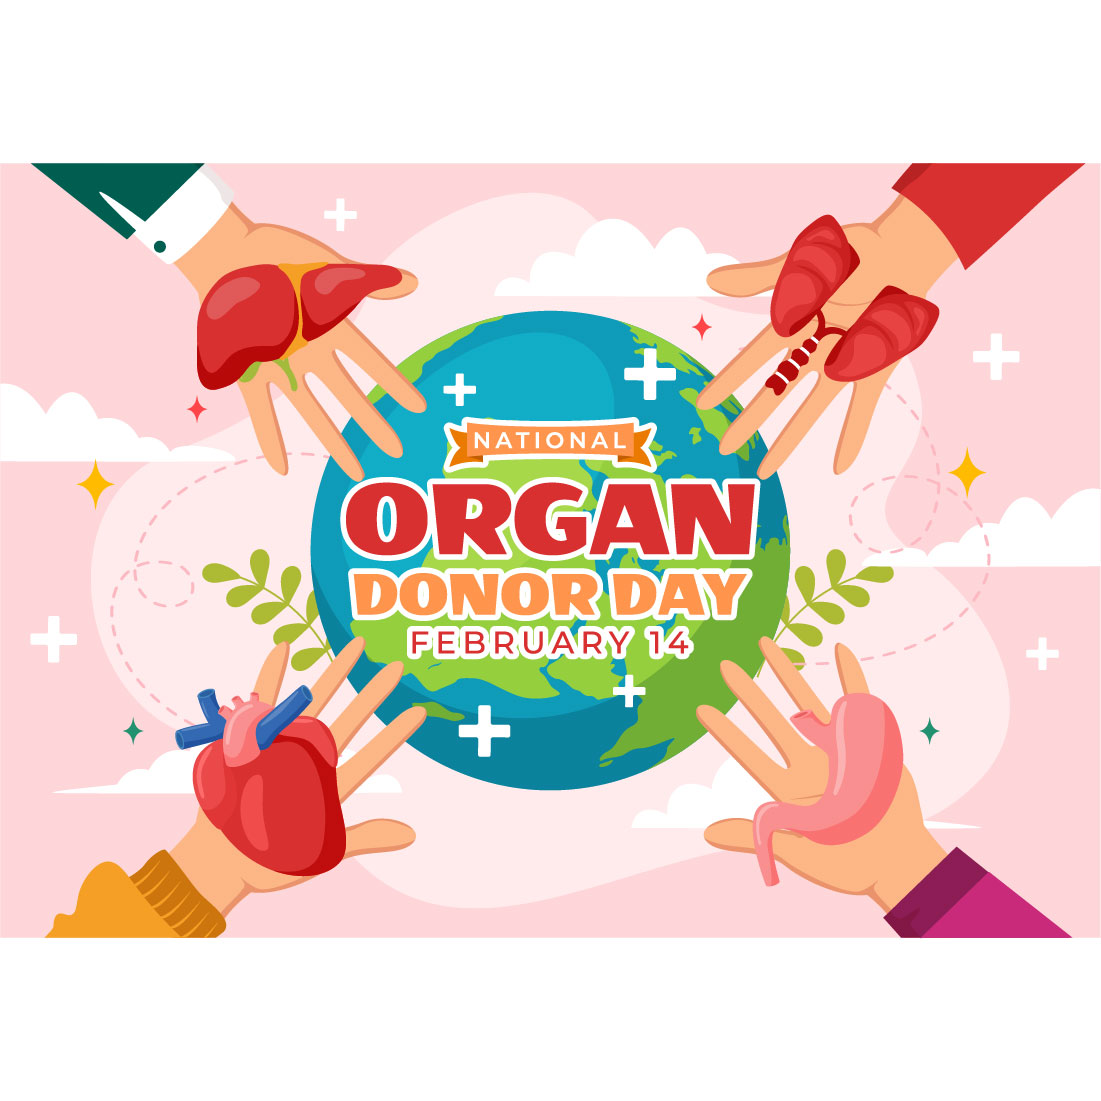 12 National Organ Donor Day Illustration cover image.